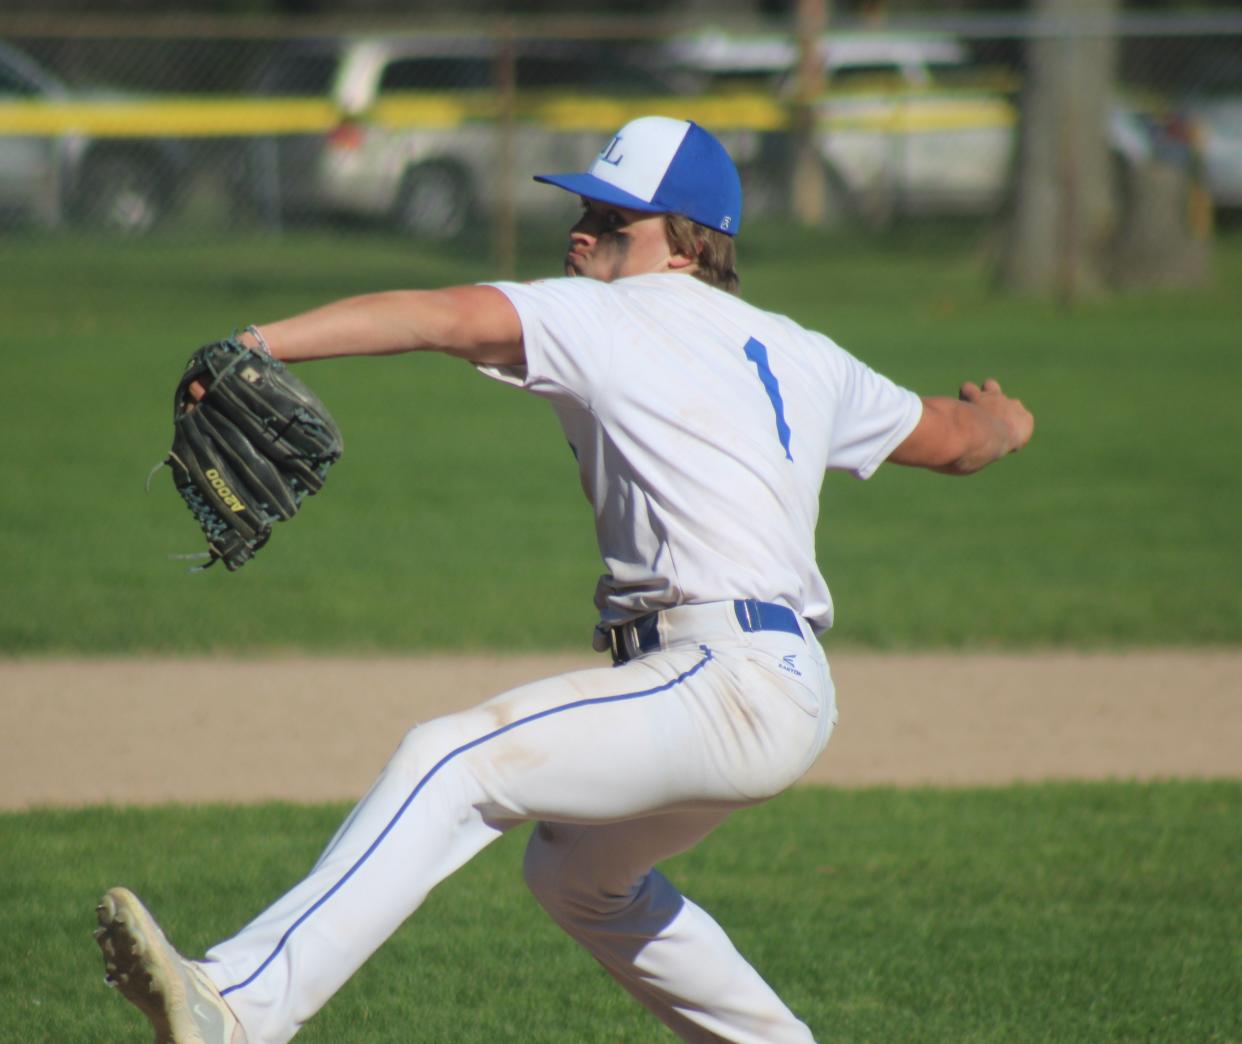 Aidan Fenstermaker (1) was the winning pitcher for Inland Lakes in game two on Friday.